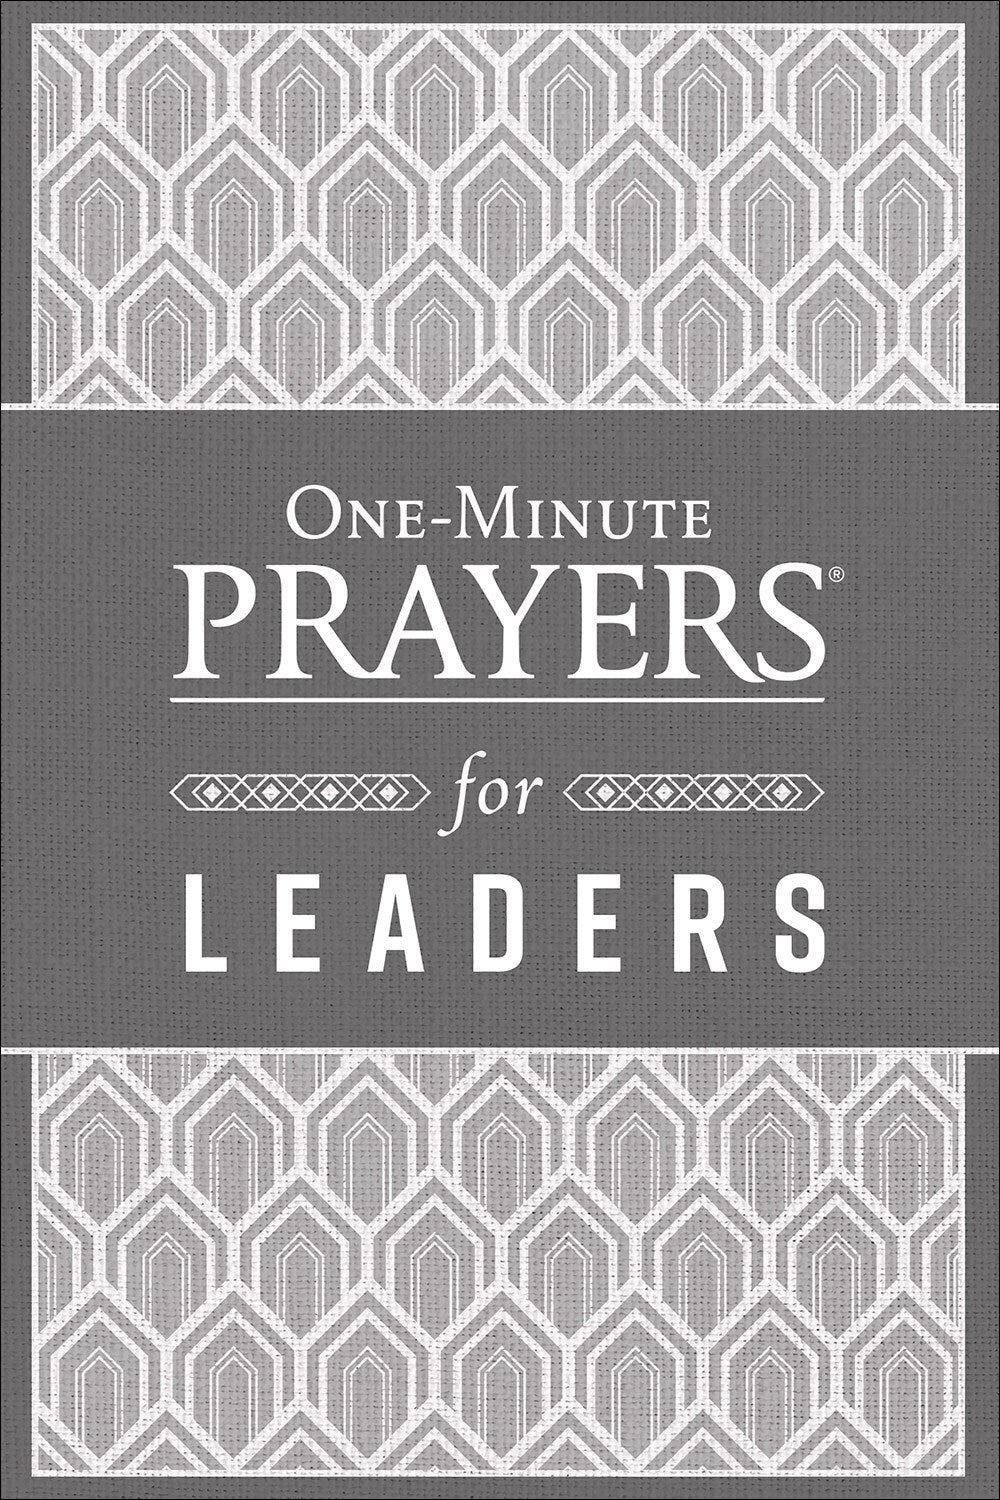 One-Minute Prayers� For Leaders